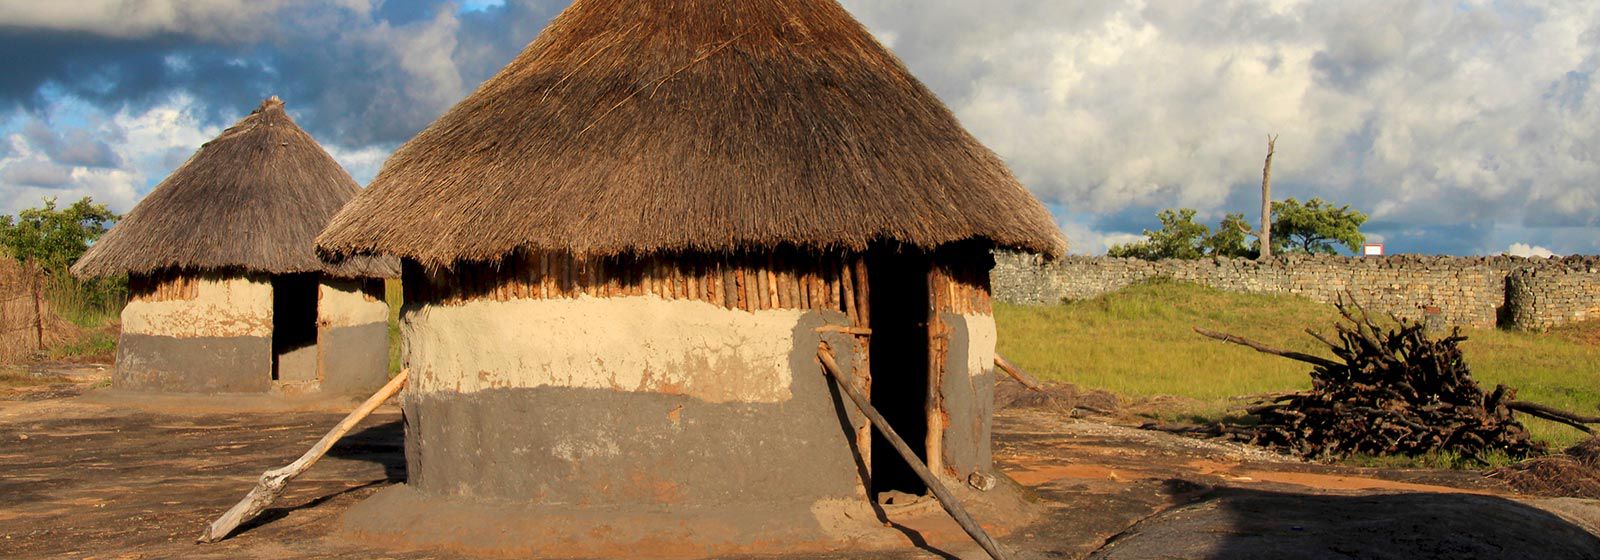 Two stick and mud huts with thatch roofs 